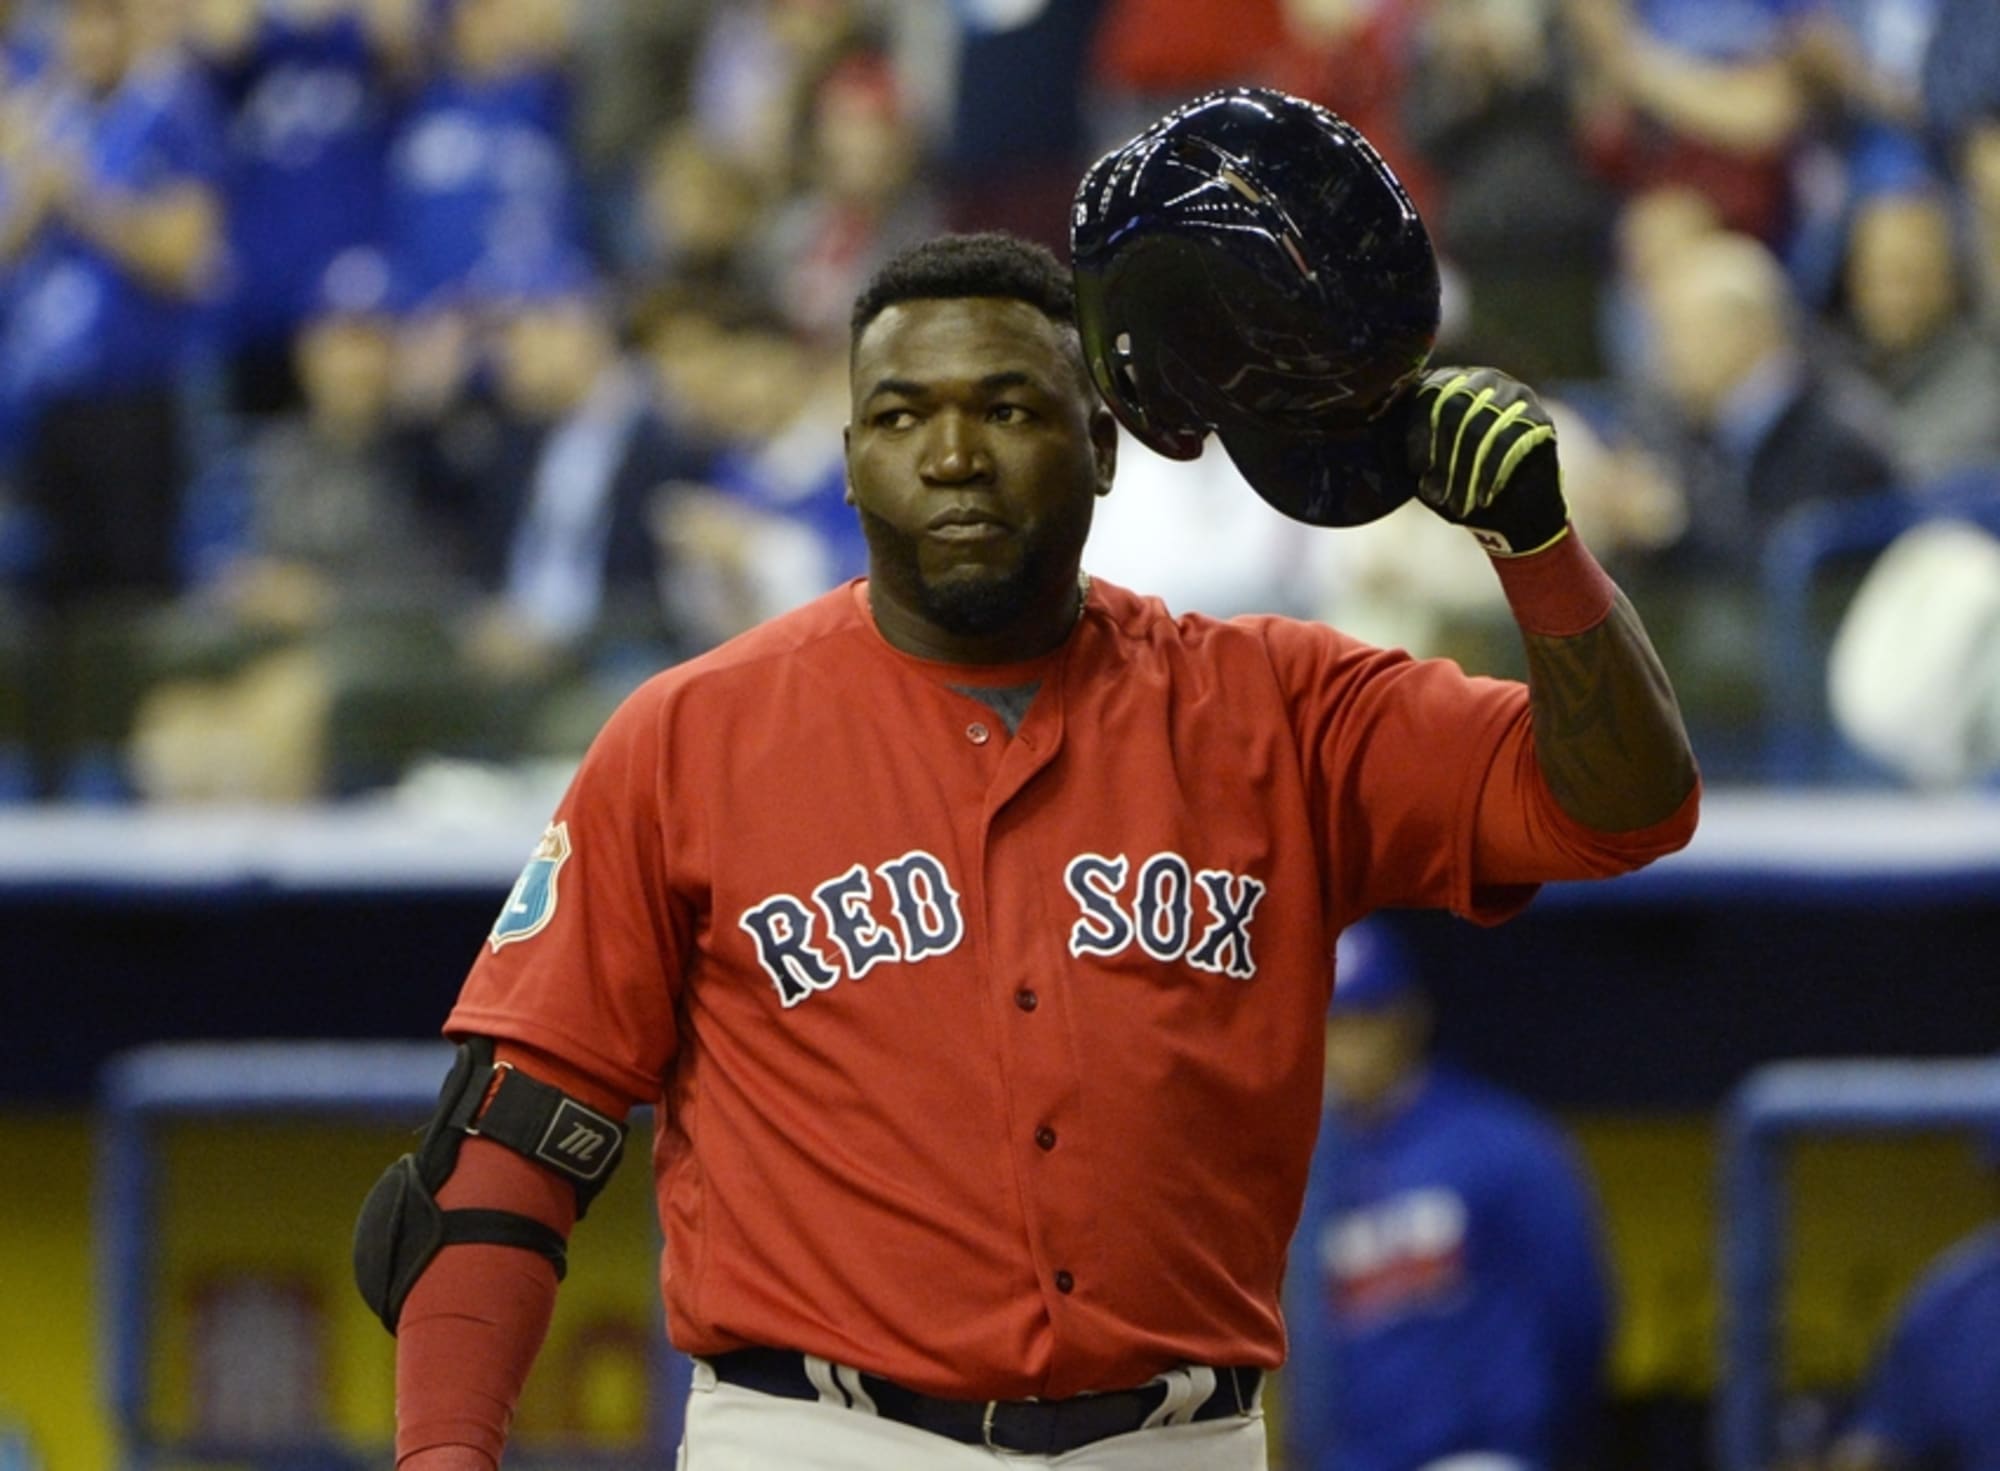 David Ortiz to play first base for Boston Red Sox